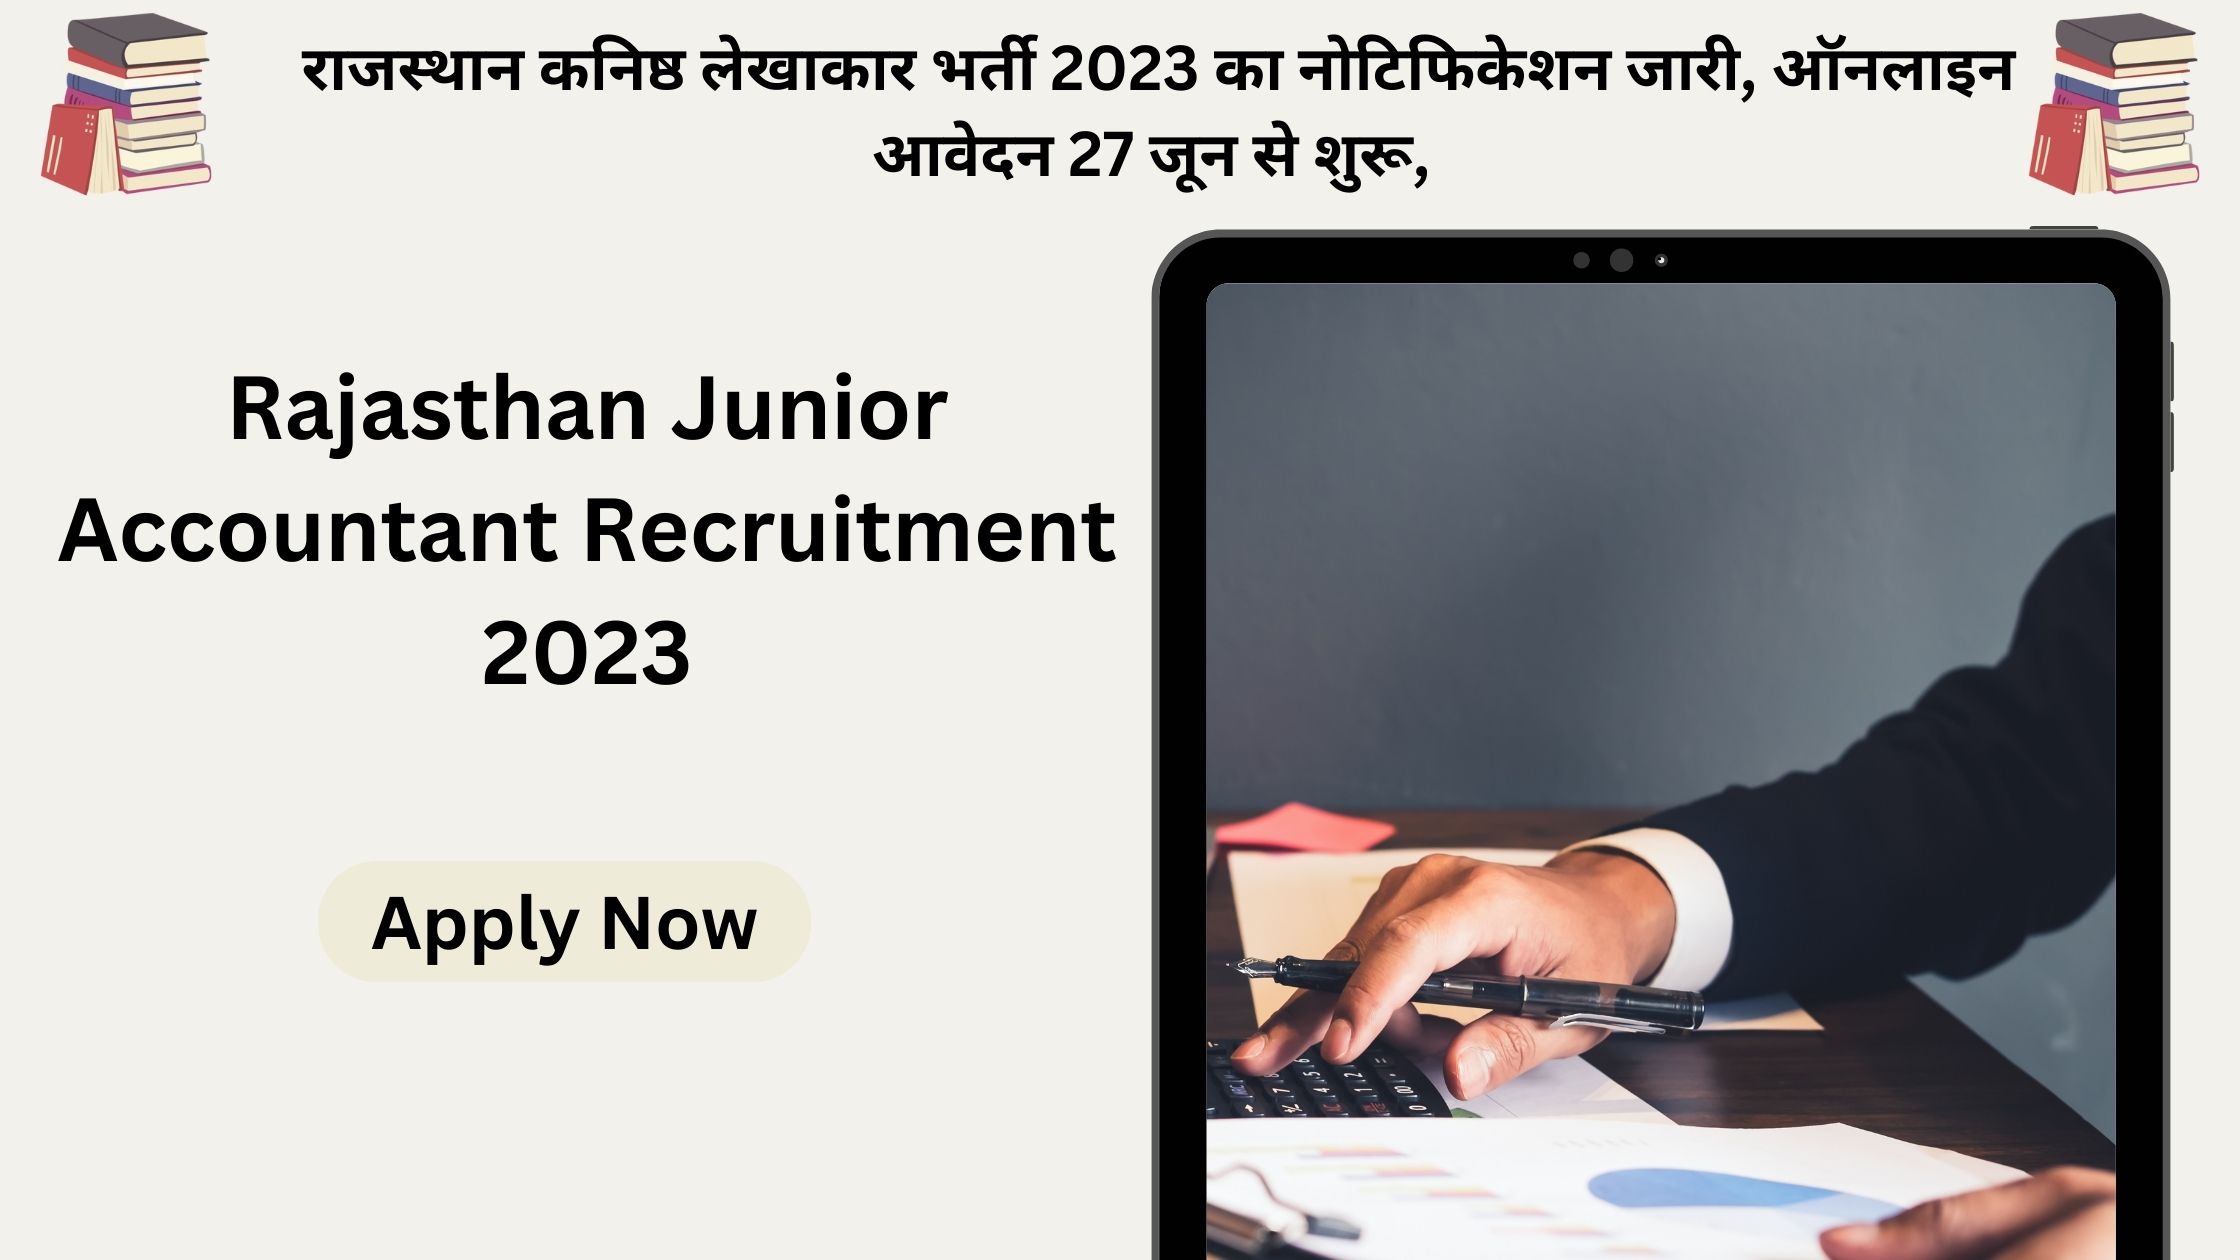 Rajasthan Junior Accountant Recruitment 2023 Apply Now